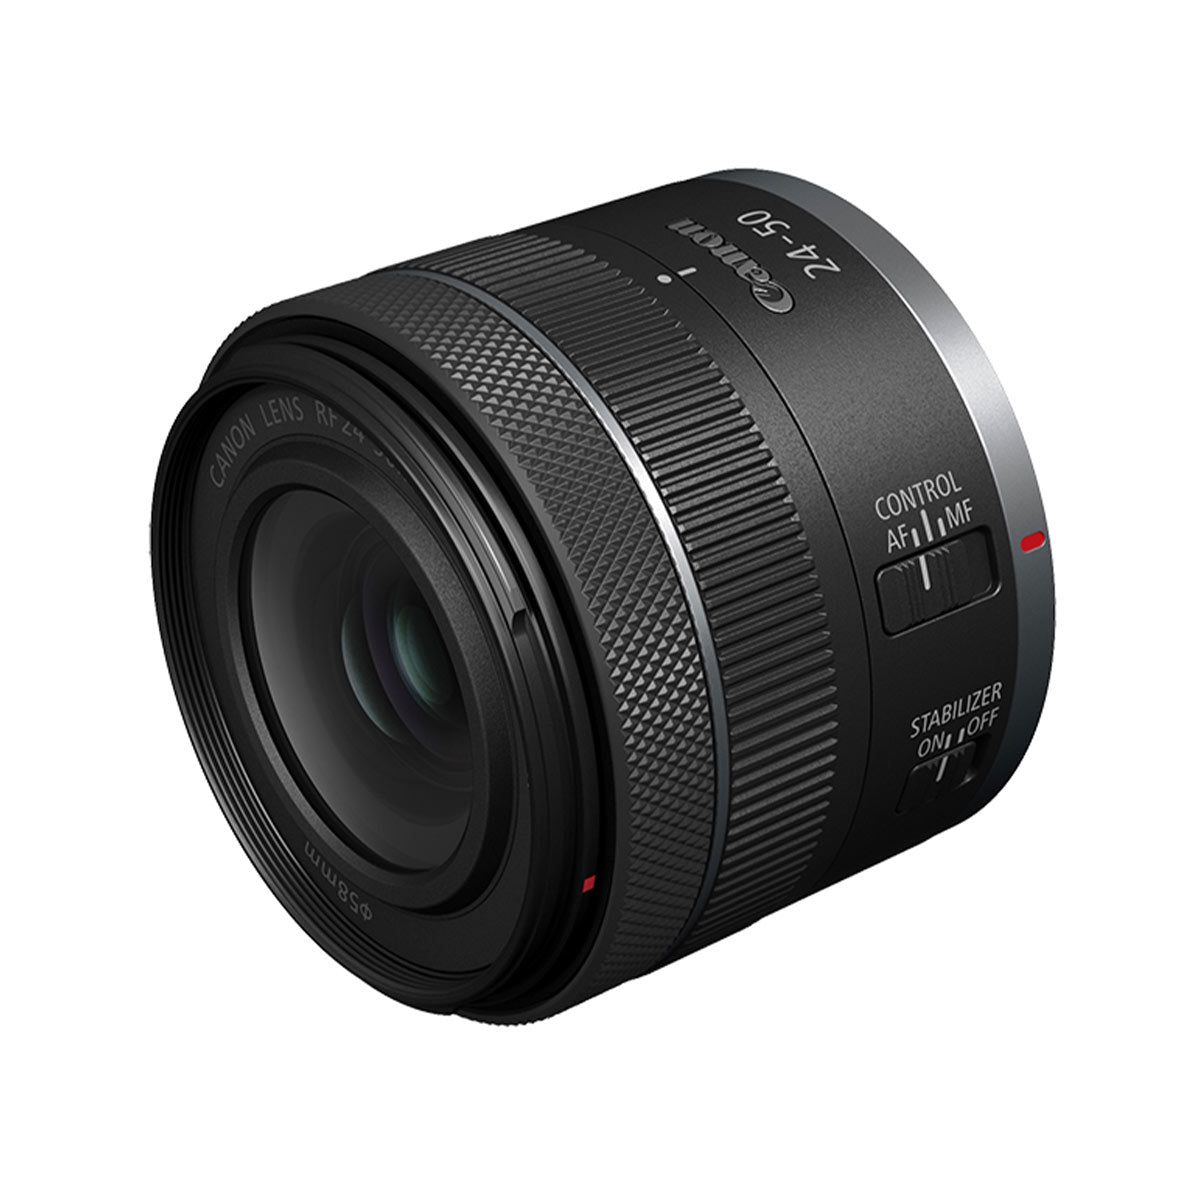 RF -S18-45mm f4.5-6.3 IS STM-